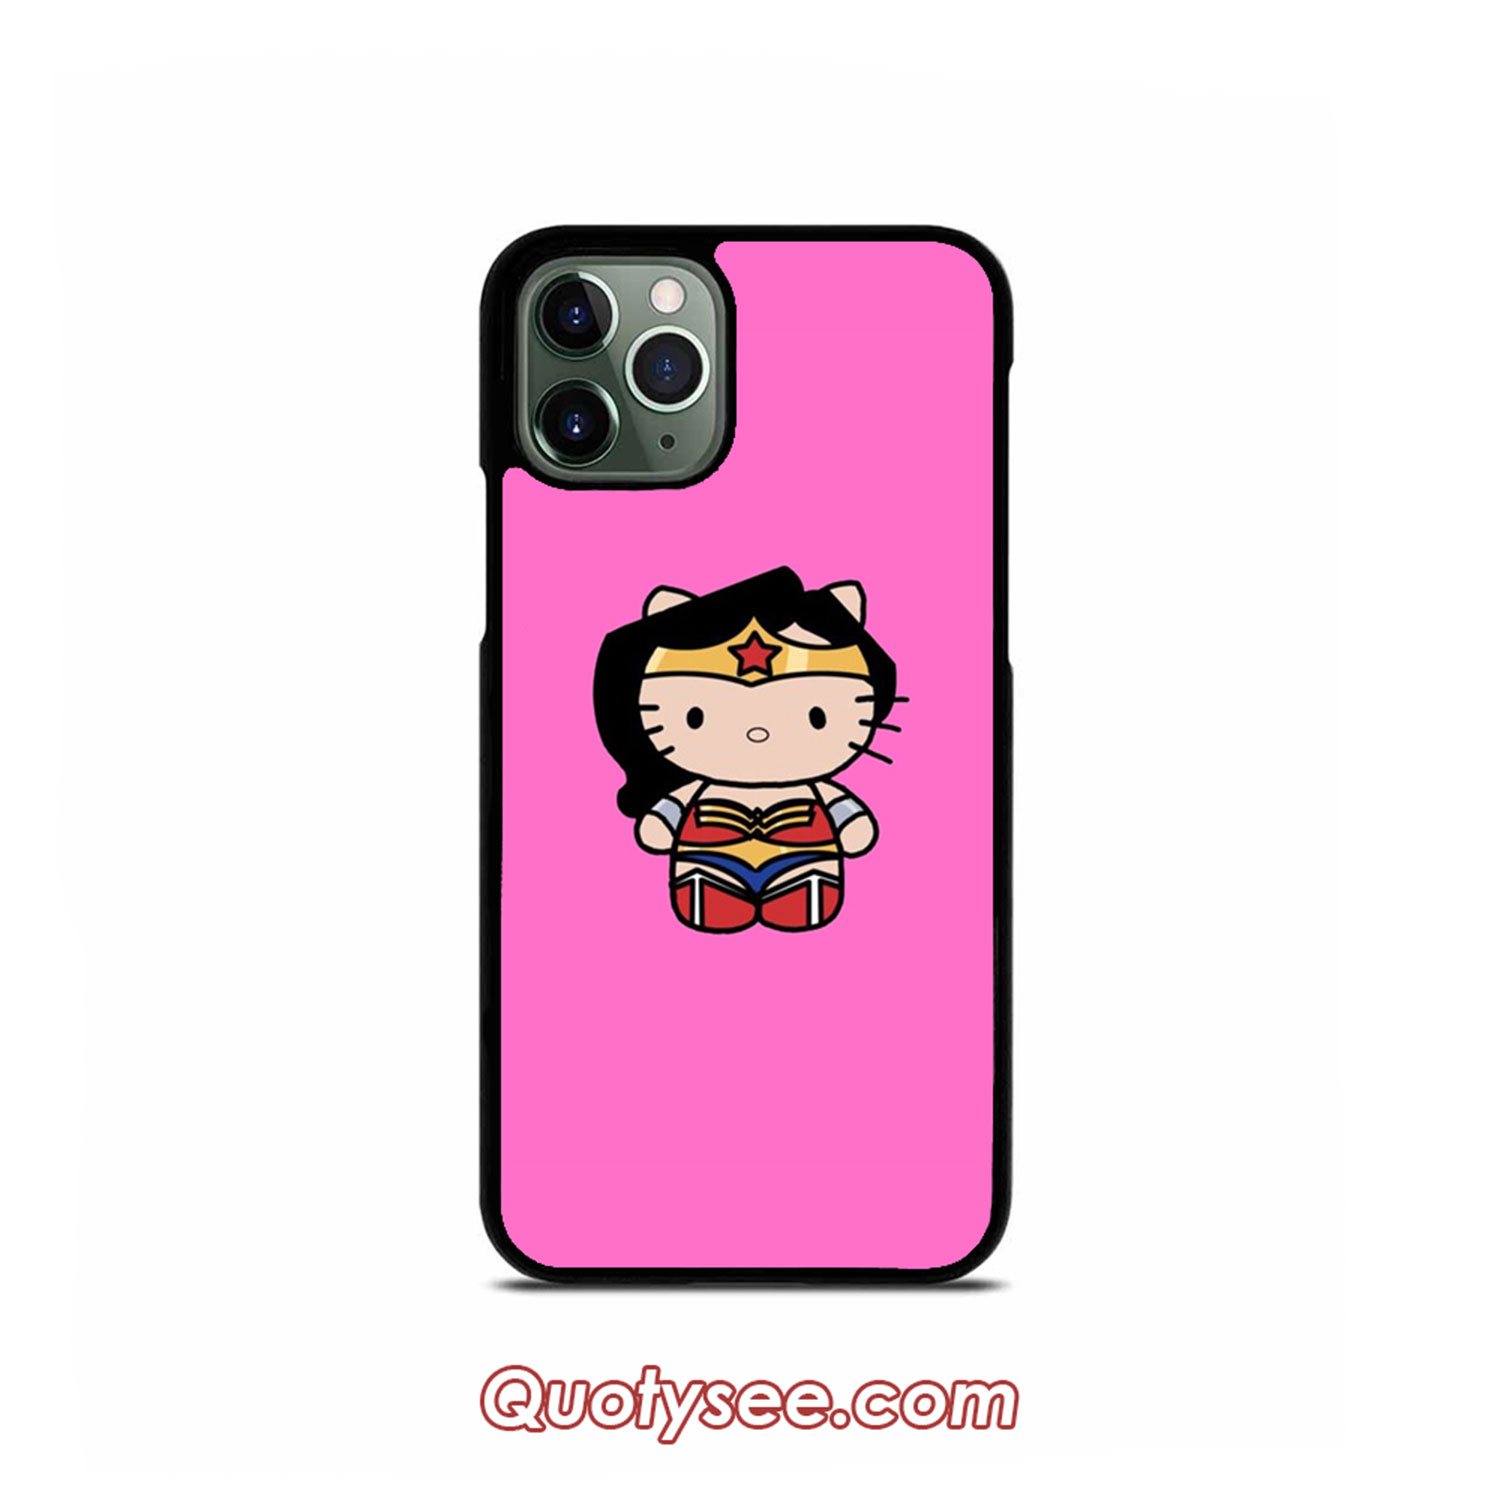 Pink Hello Kitty iPhone 8 Plus Case